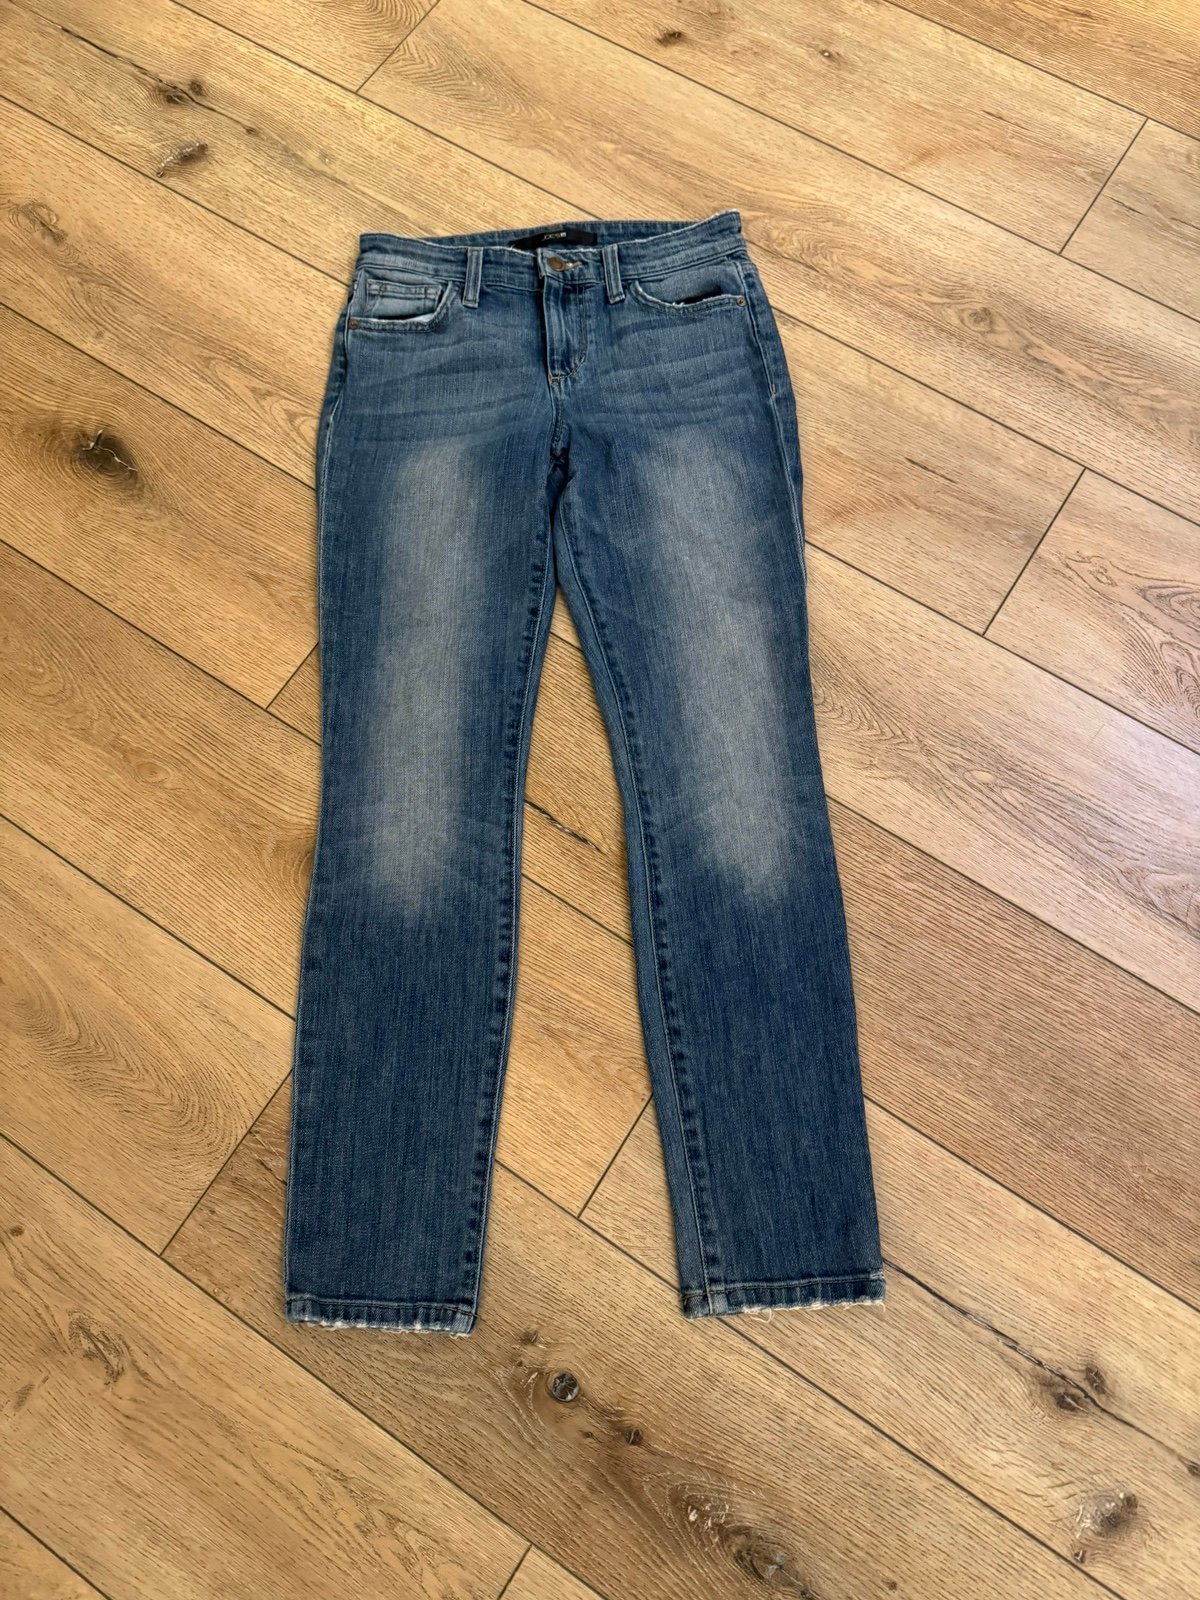 Authentic Joes jeans skinny ankle PiA5hZPRy Outlet Stor